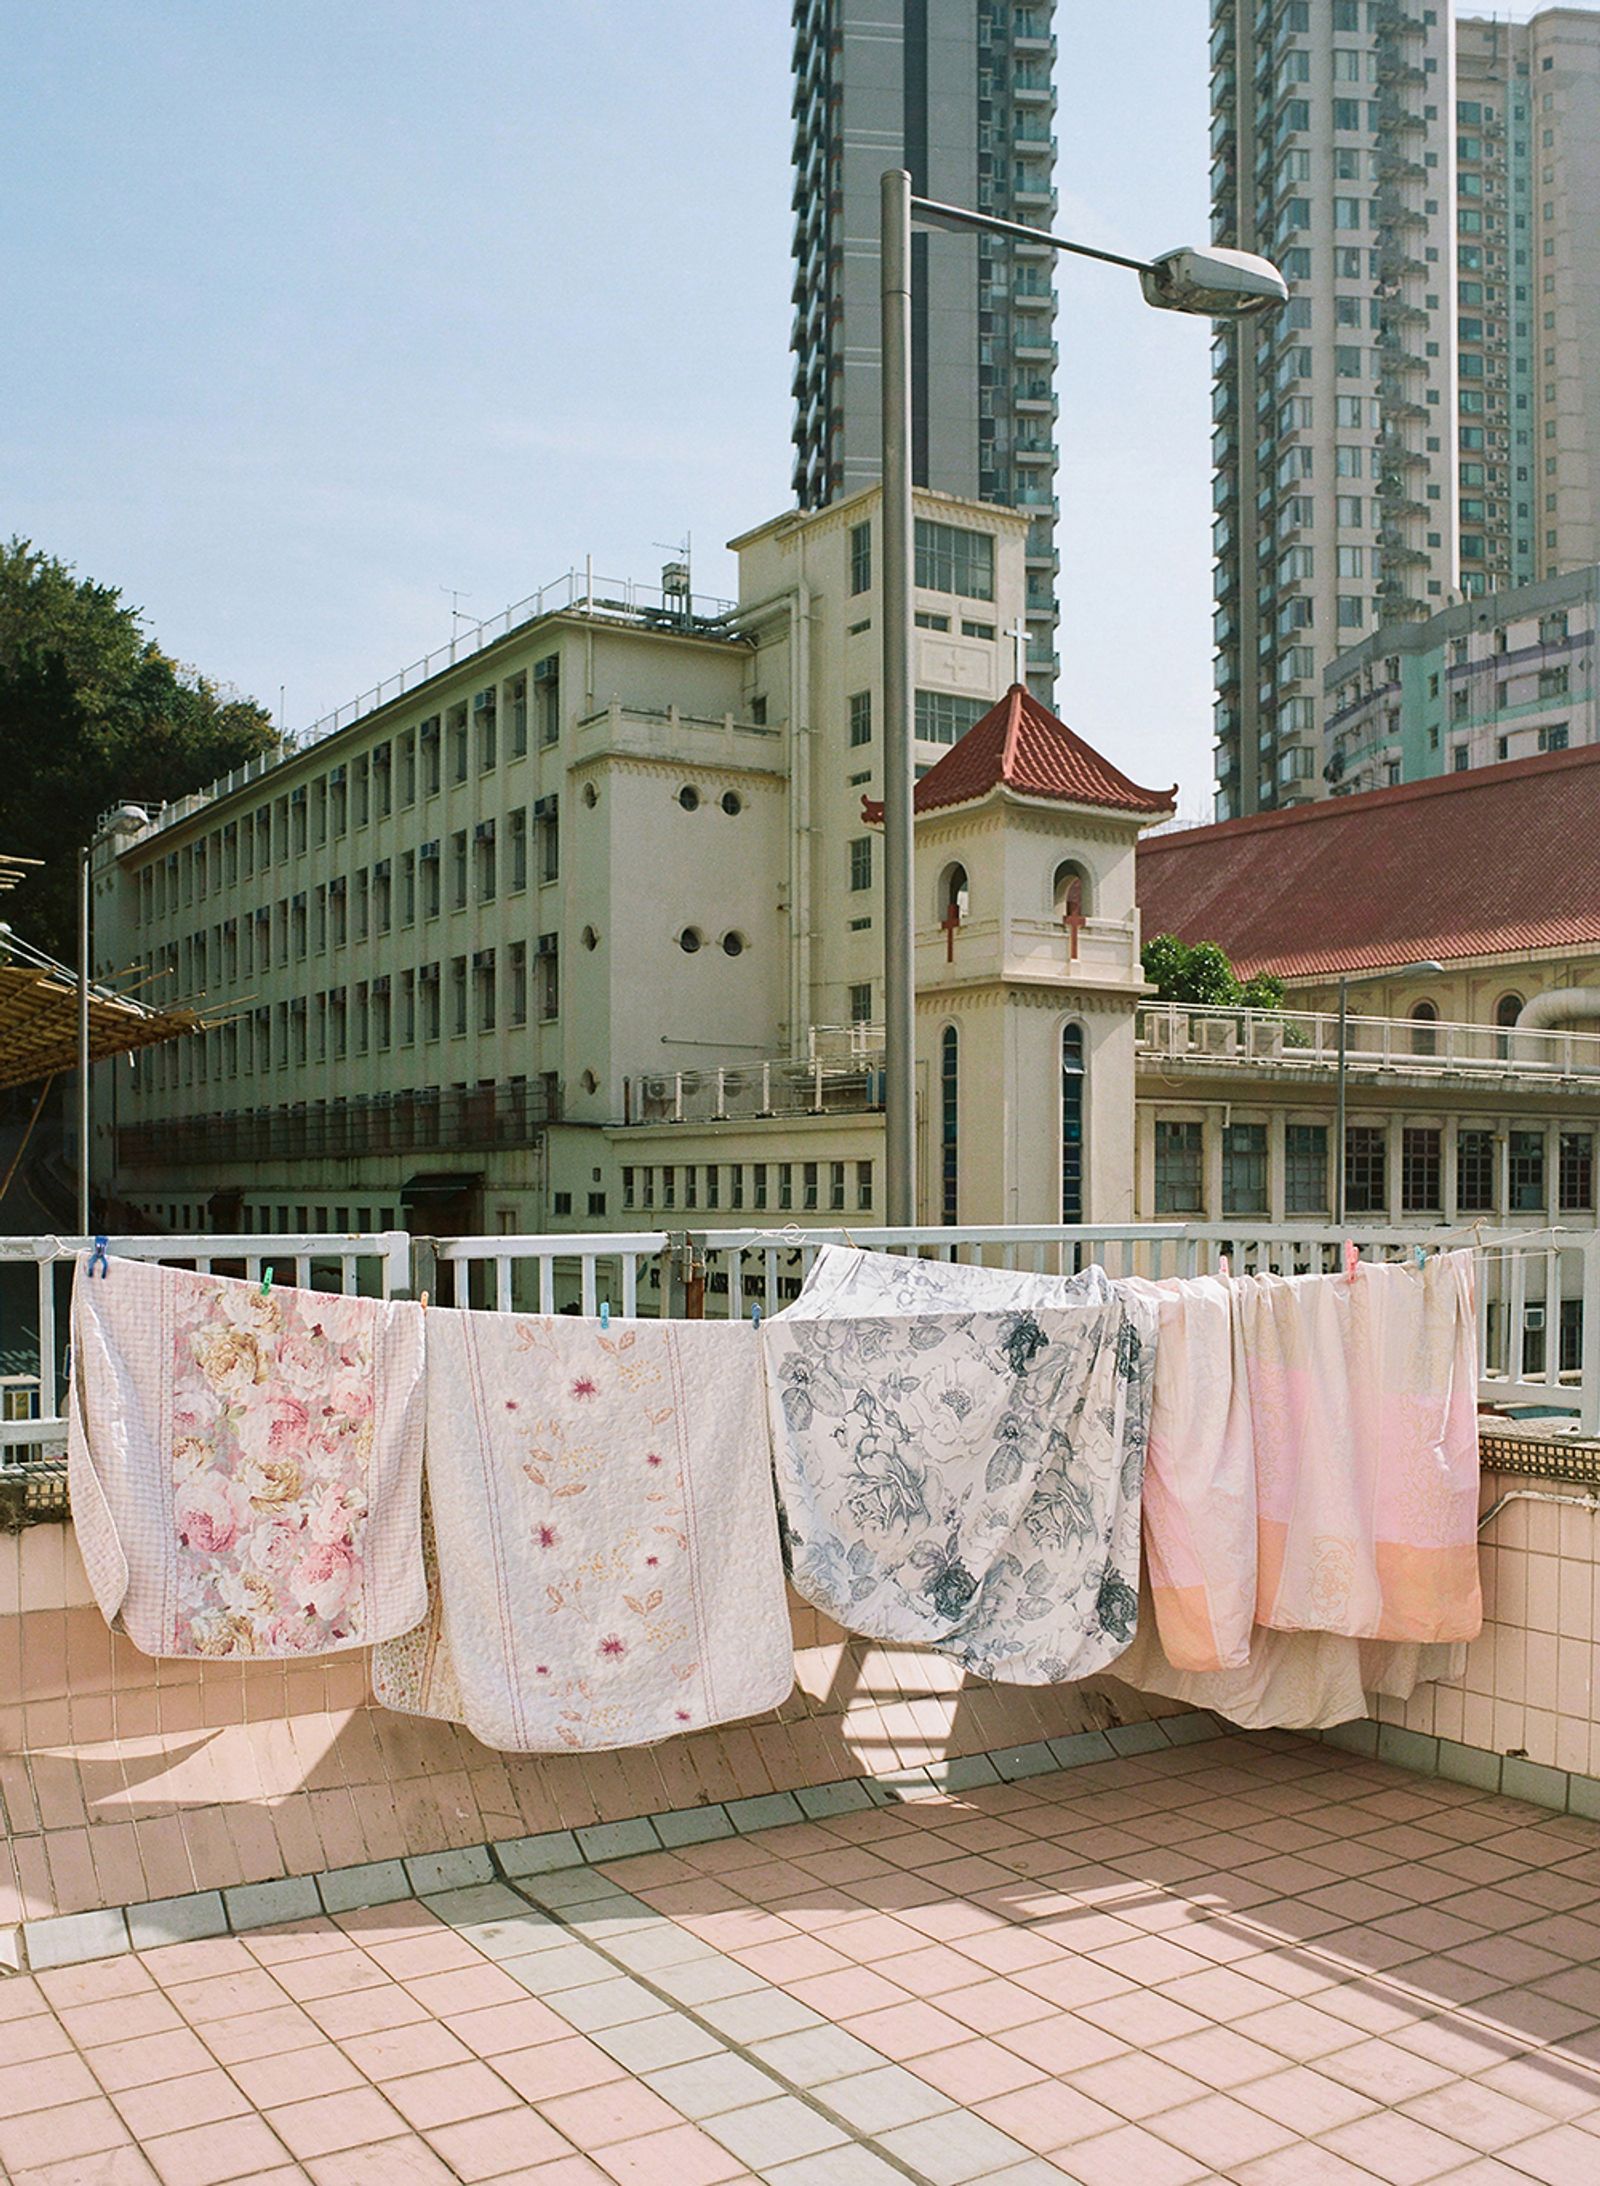 © Jimmi Wing Ka Ho - Image from the Laundry Art photography project